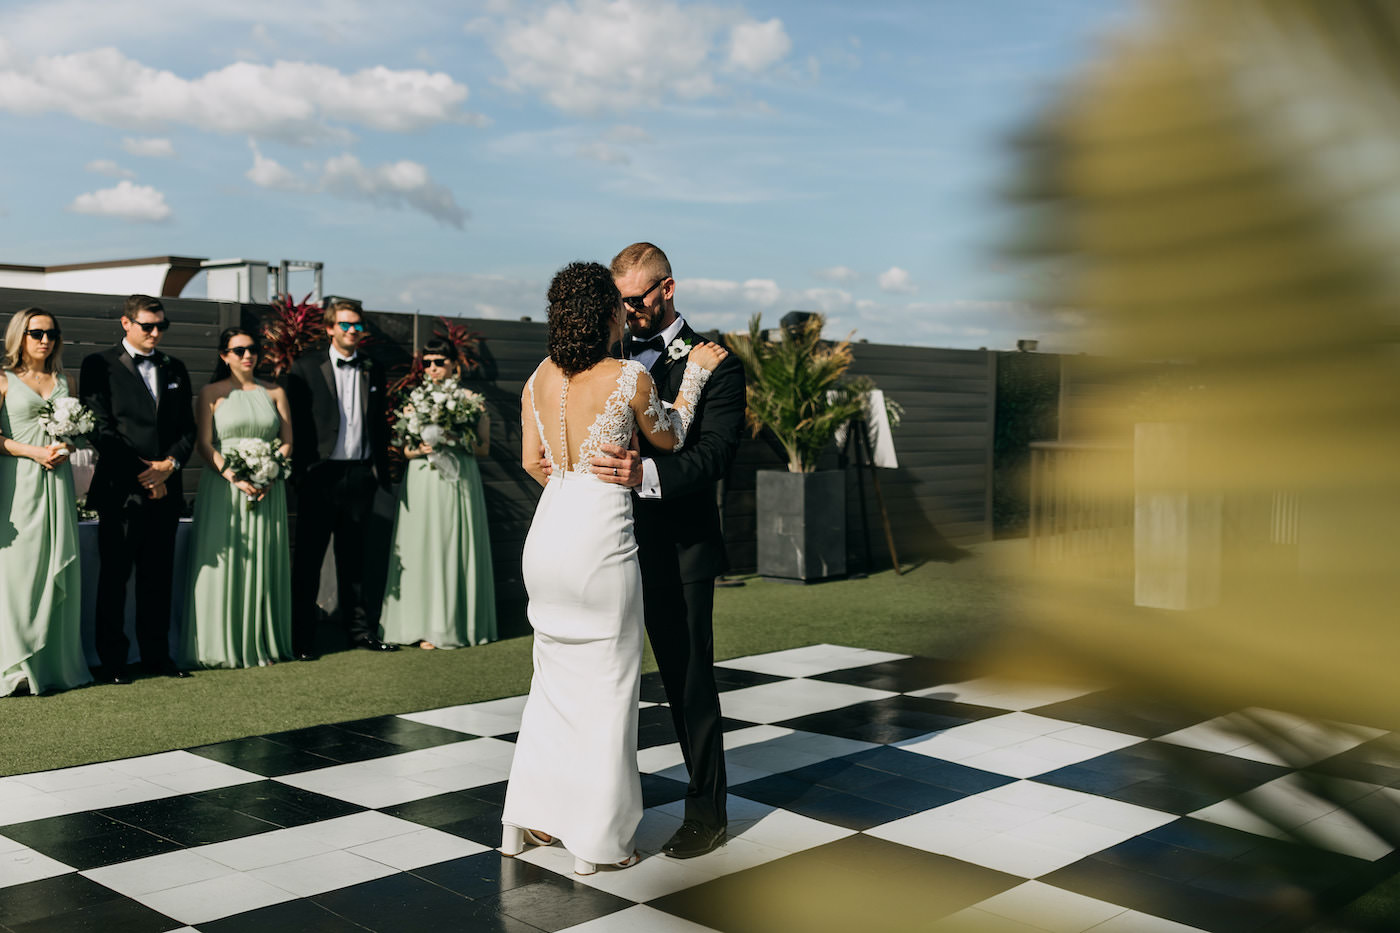 Florida Bride and Groom First Dance on Checkered Black and White Dancefloor on Rooftop Bar of The Hotel Zamora on St. Pete Beach | Tampa Bay Wedding DJ Grant Hemond and Associates | Rentals Gabro Event Services